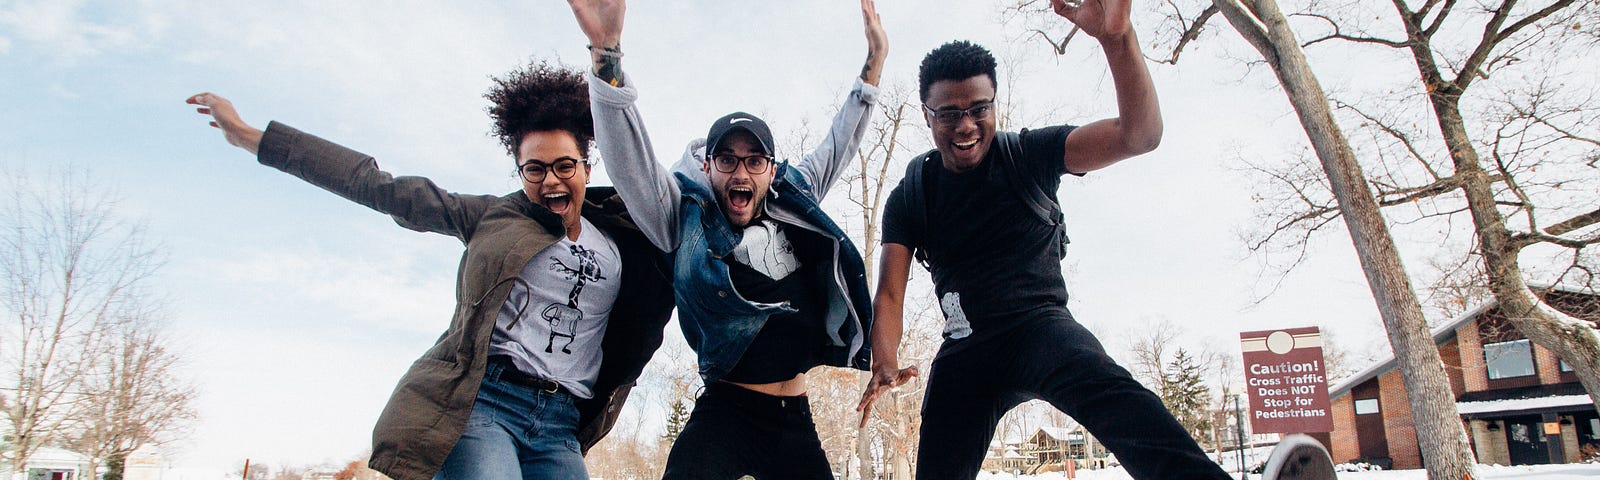 Three young adults jumping in the air and smiling.